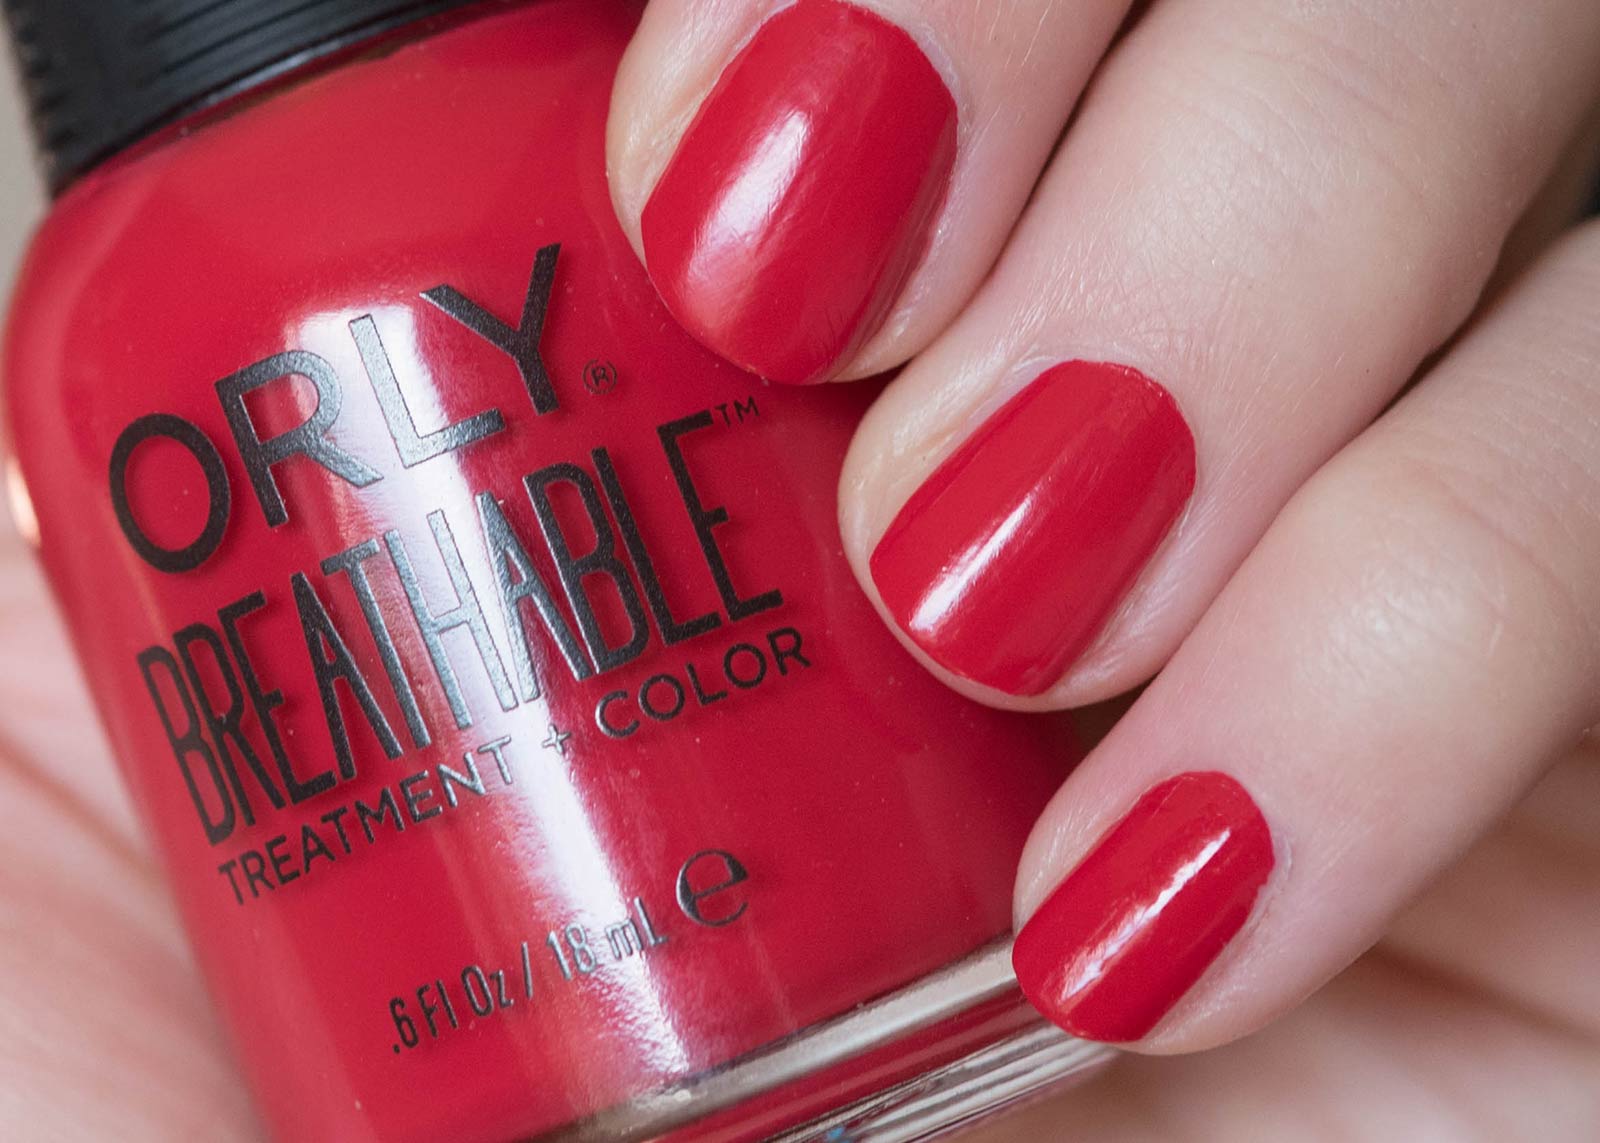 10. Orly Breathable Treatment + Color Nail Polish, Love My Nails - wide 6